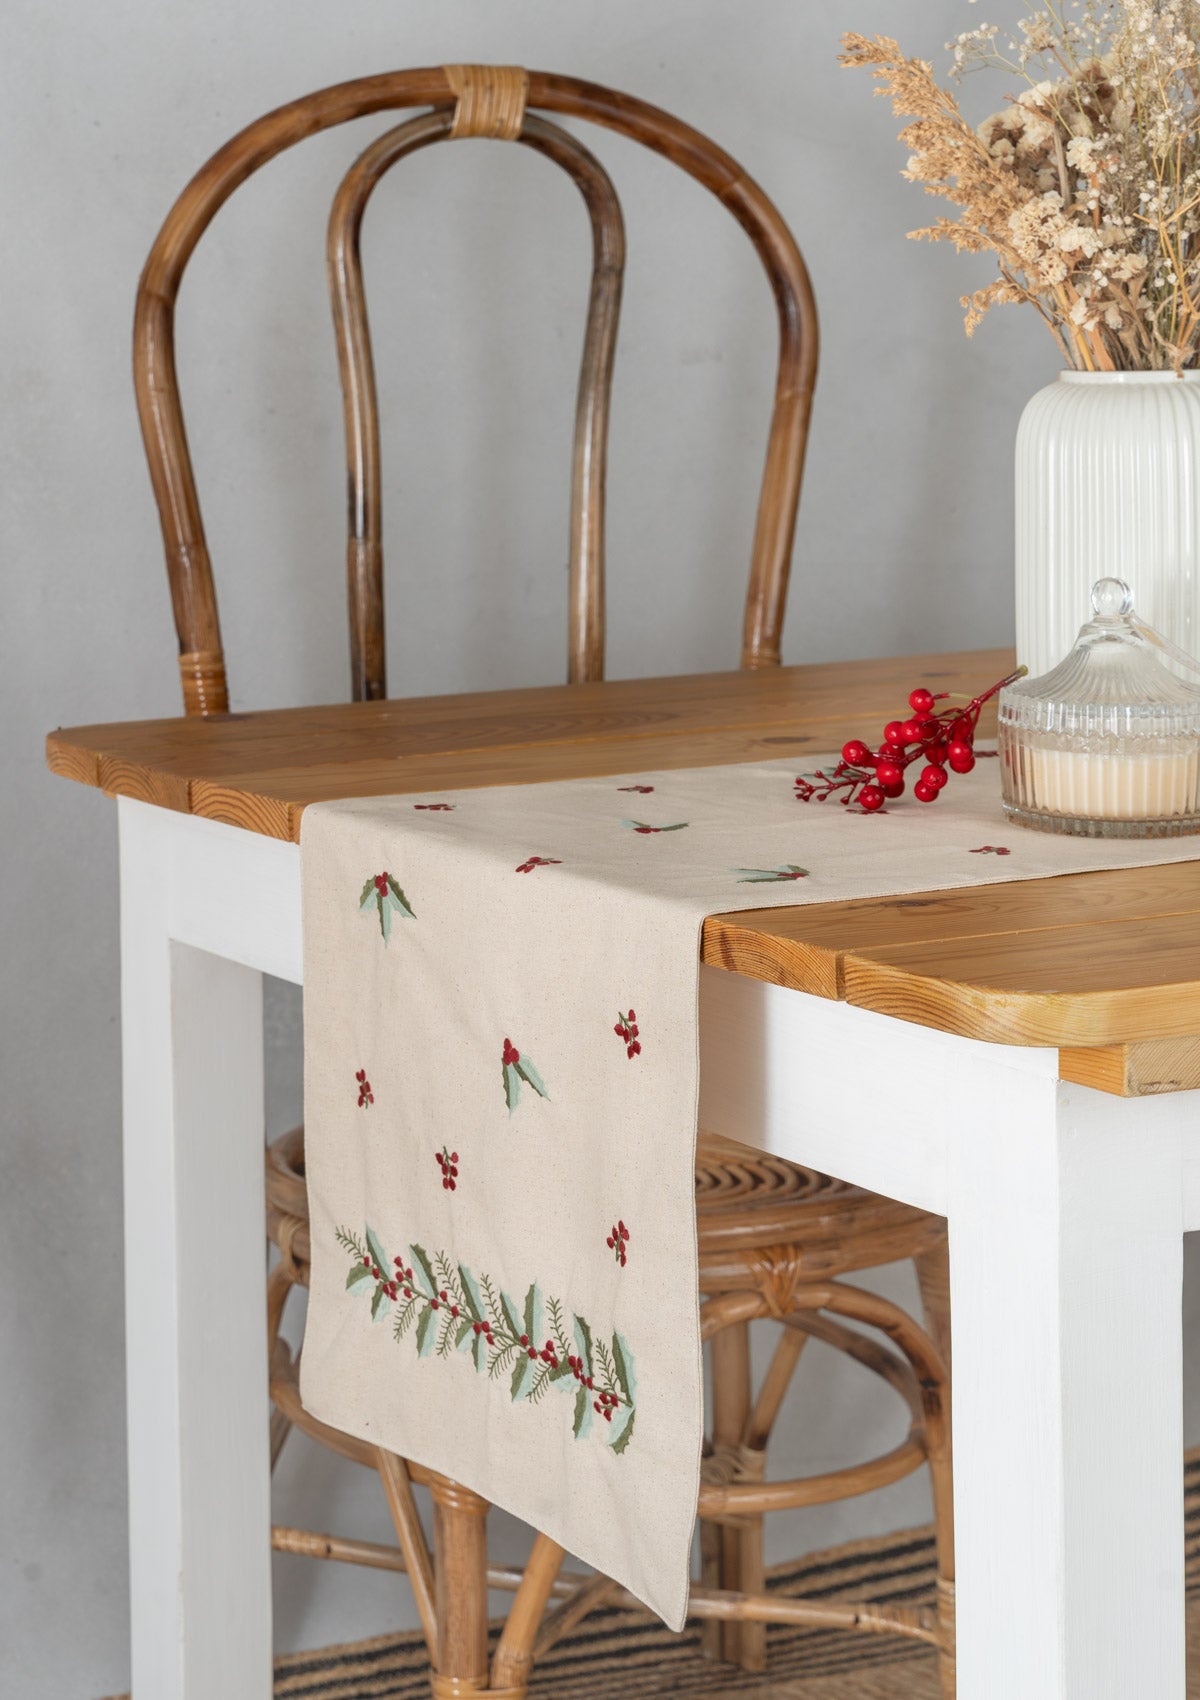 Merry Berry 100% cotton Christmas table runner for 4 seater or 6 seater Dining with tassels - cream